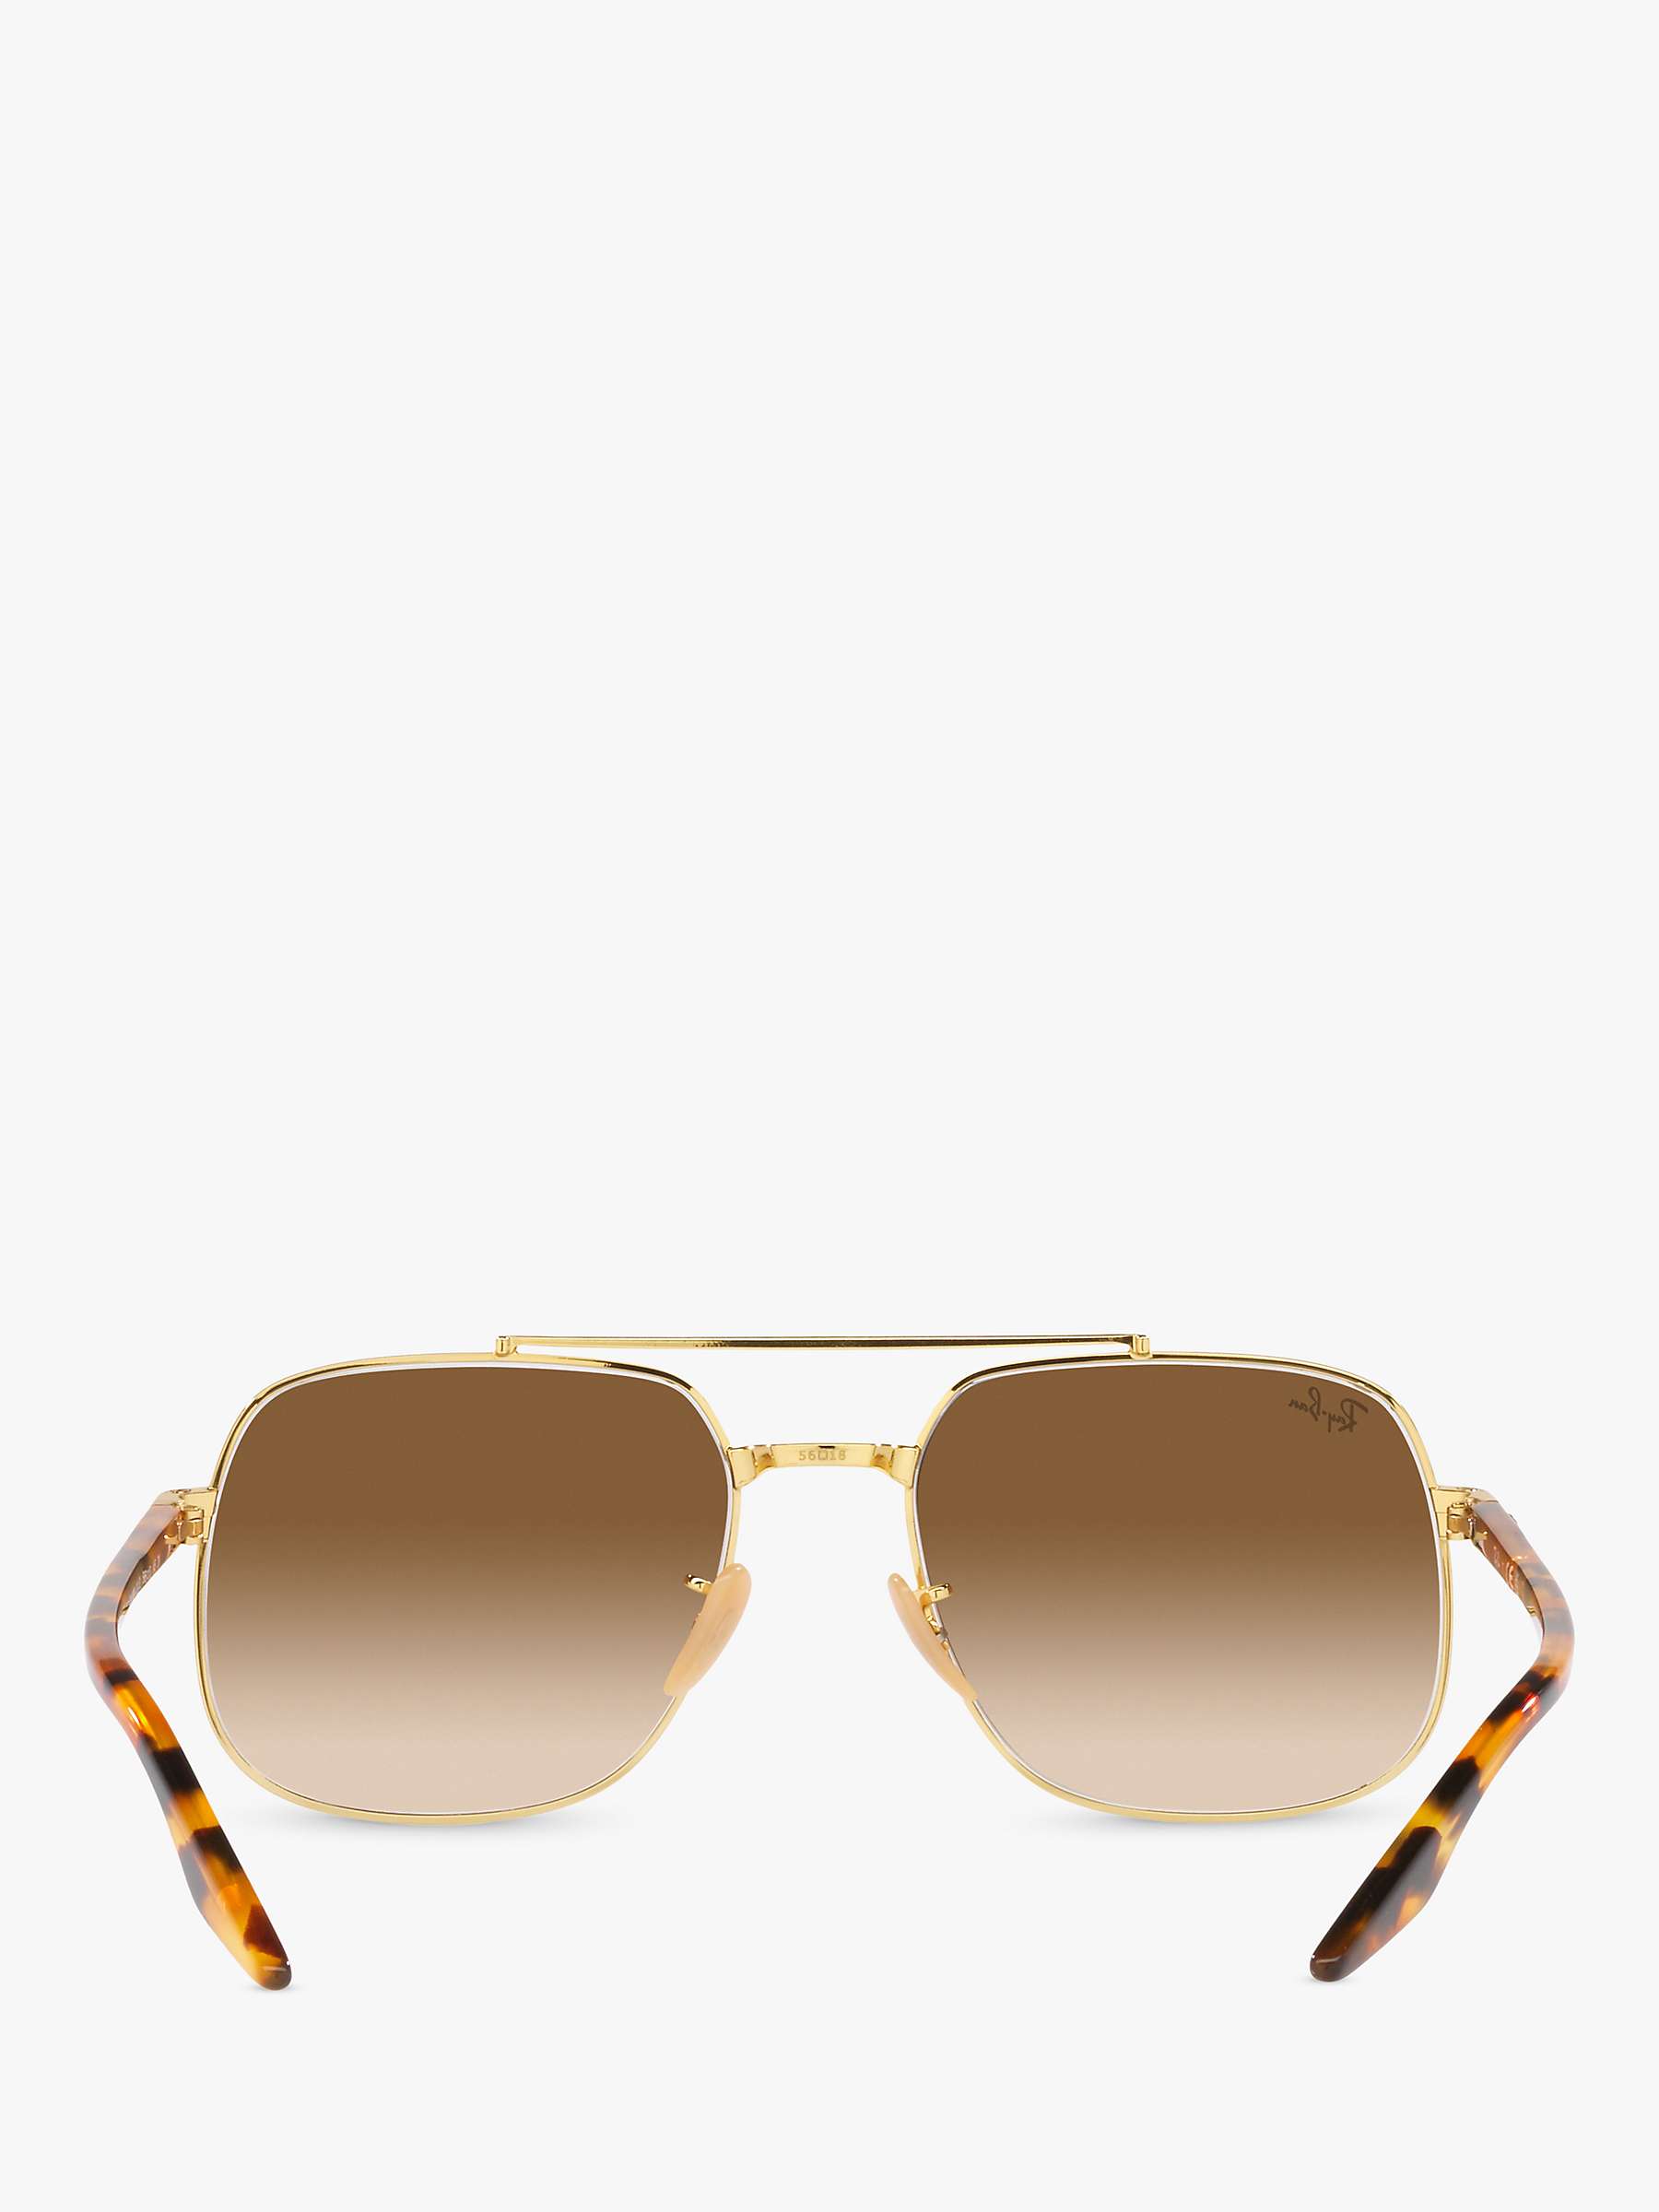 Buy Ray-Ban RB3699 Unisex Square Sunglasses, Arista Gold/Brown Gradient Online at johnlewis.com